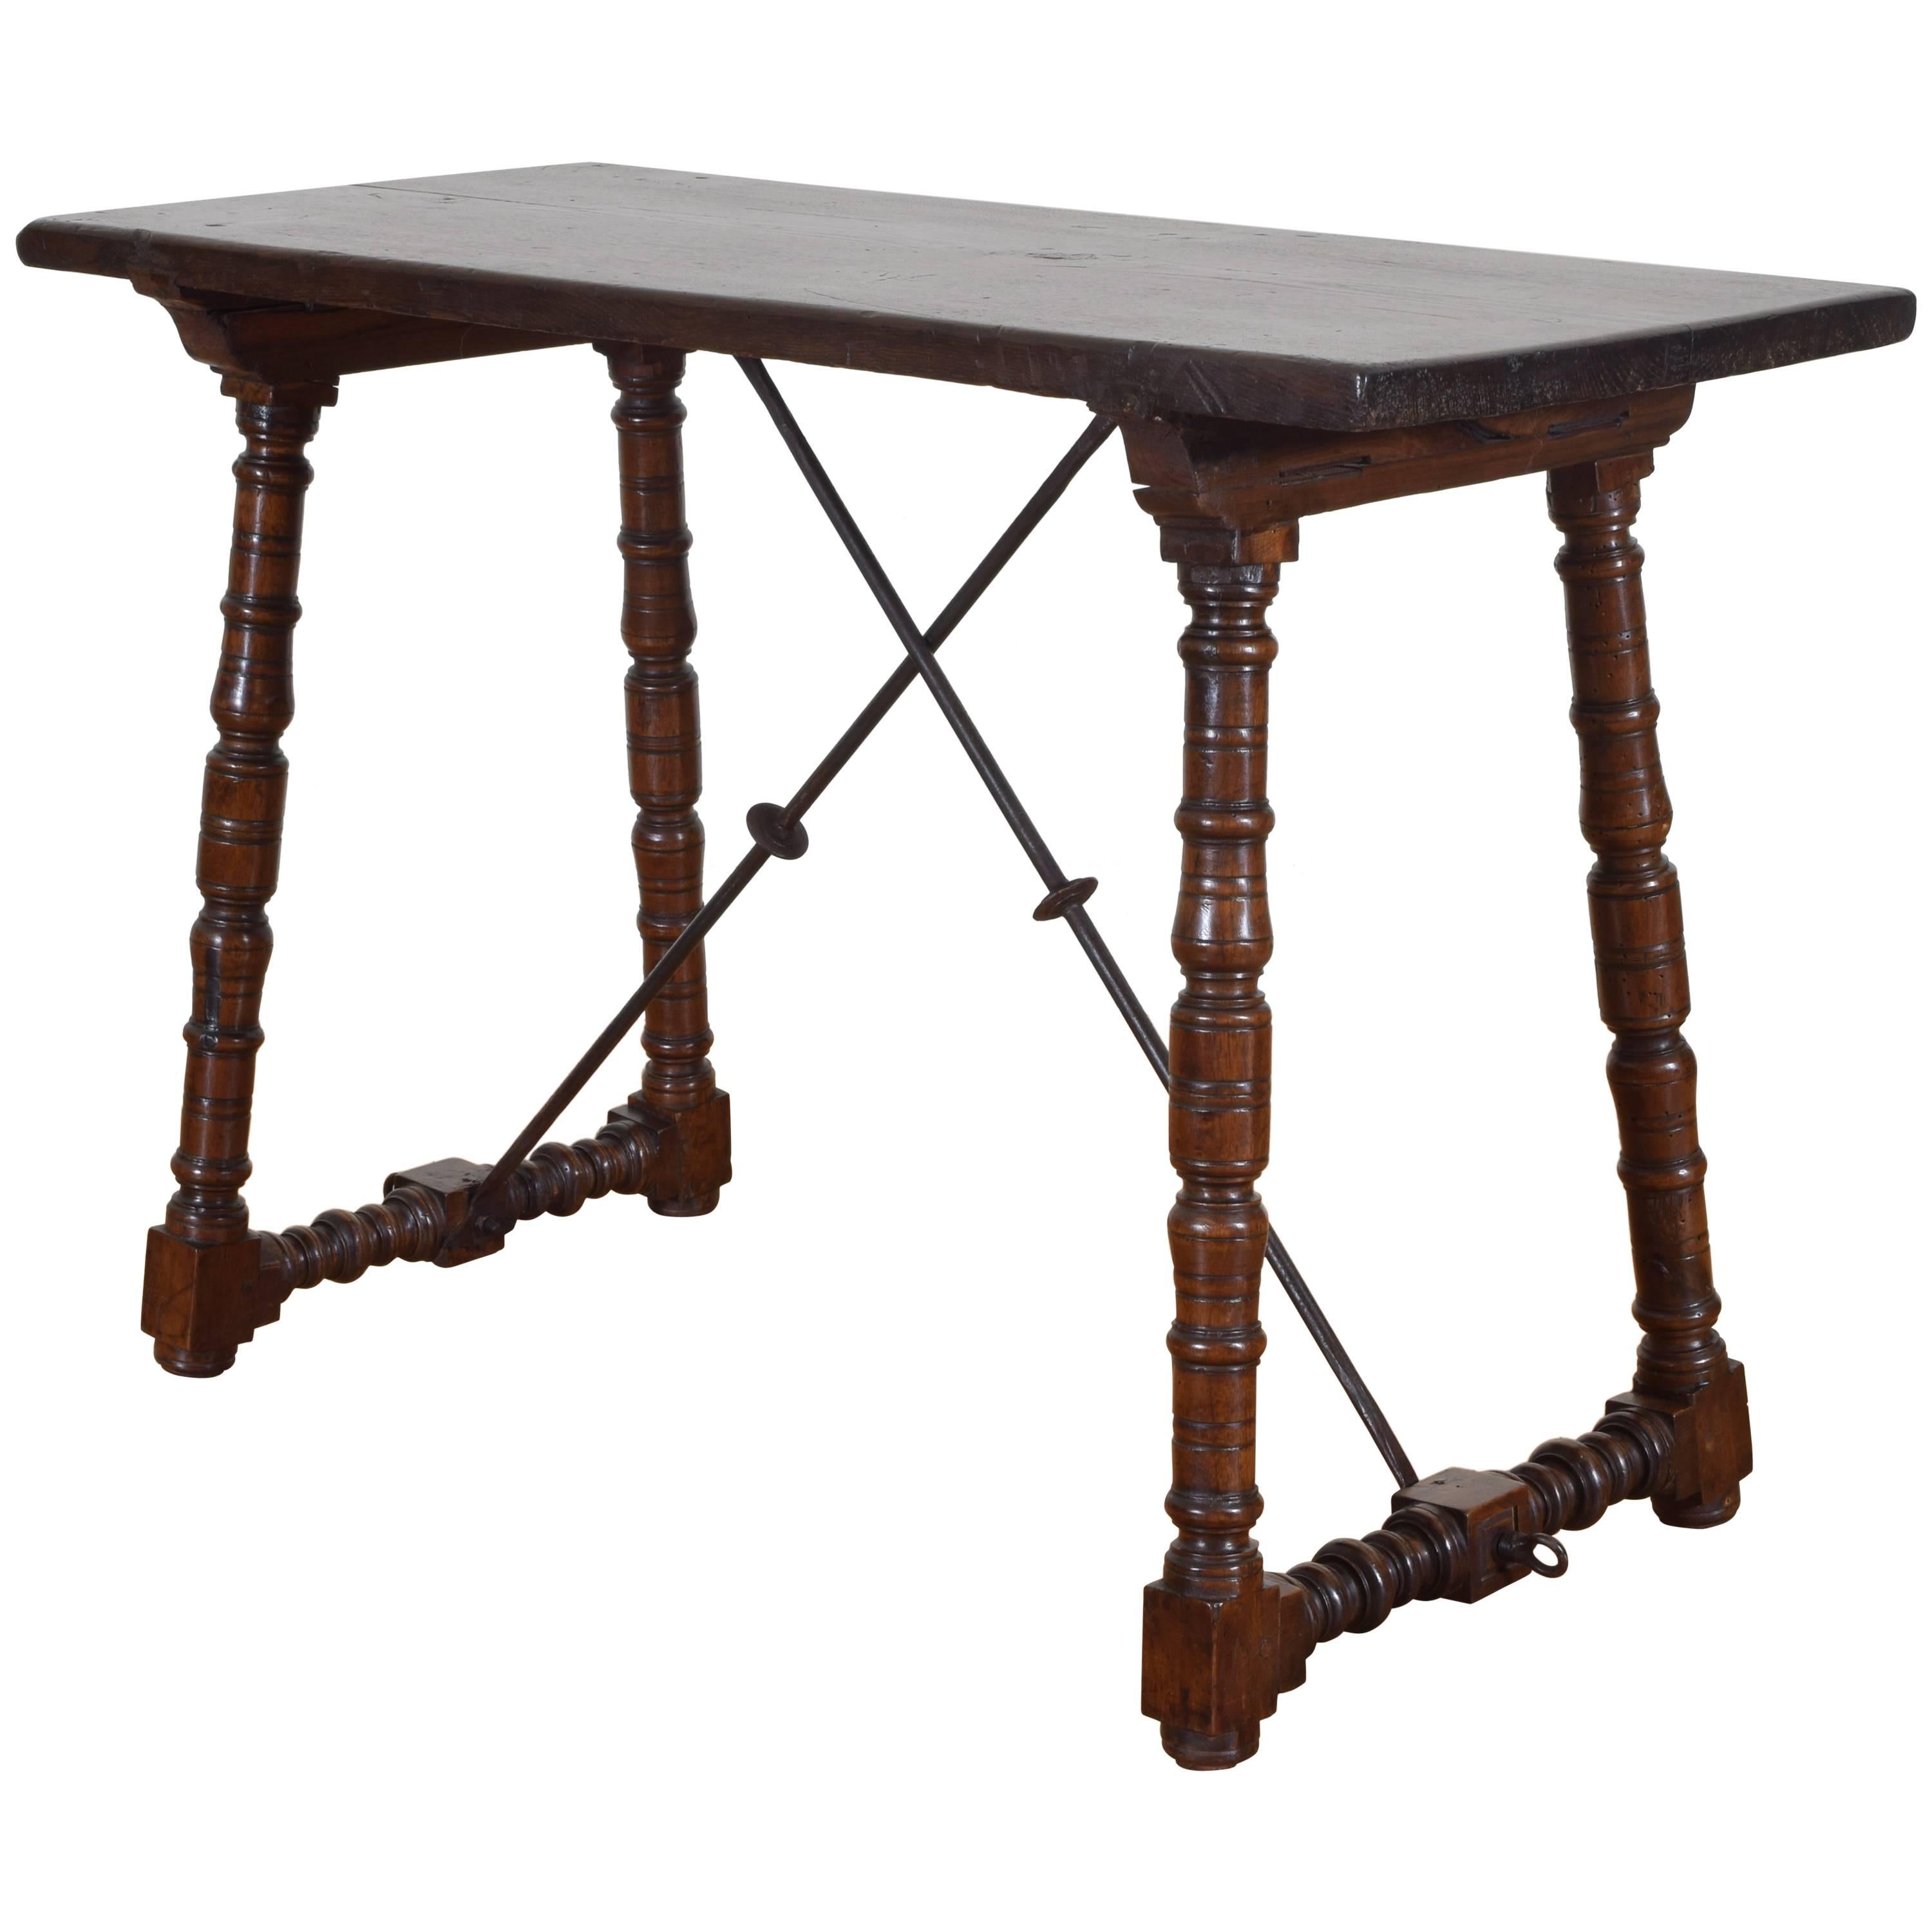 Spanish Walnut and Wrought Iron Table, Early 18th Century